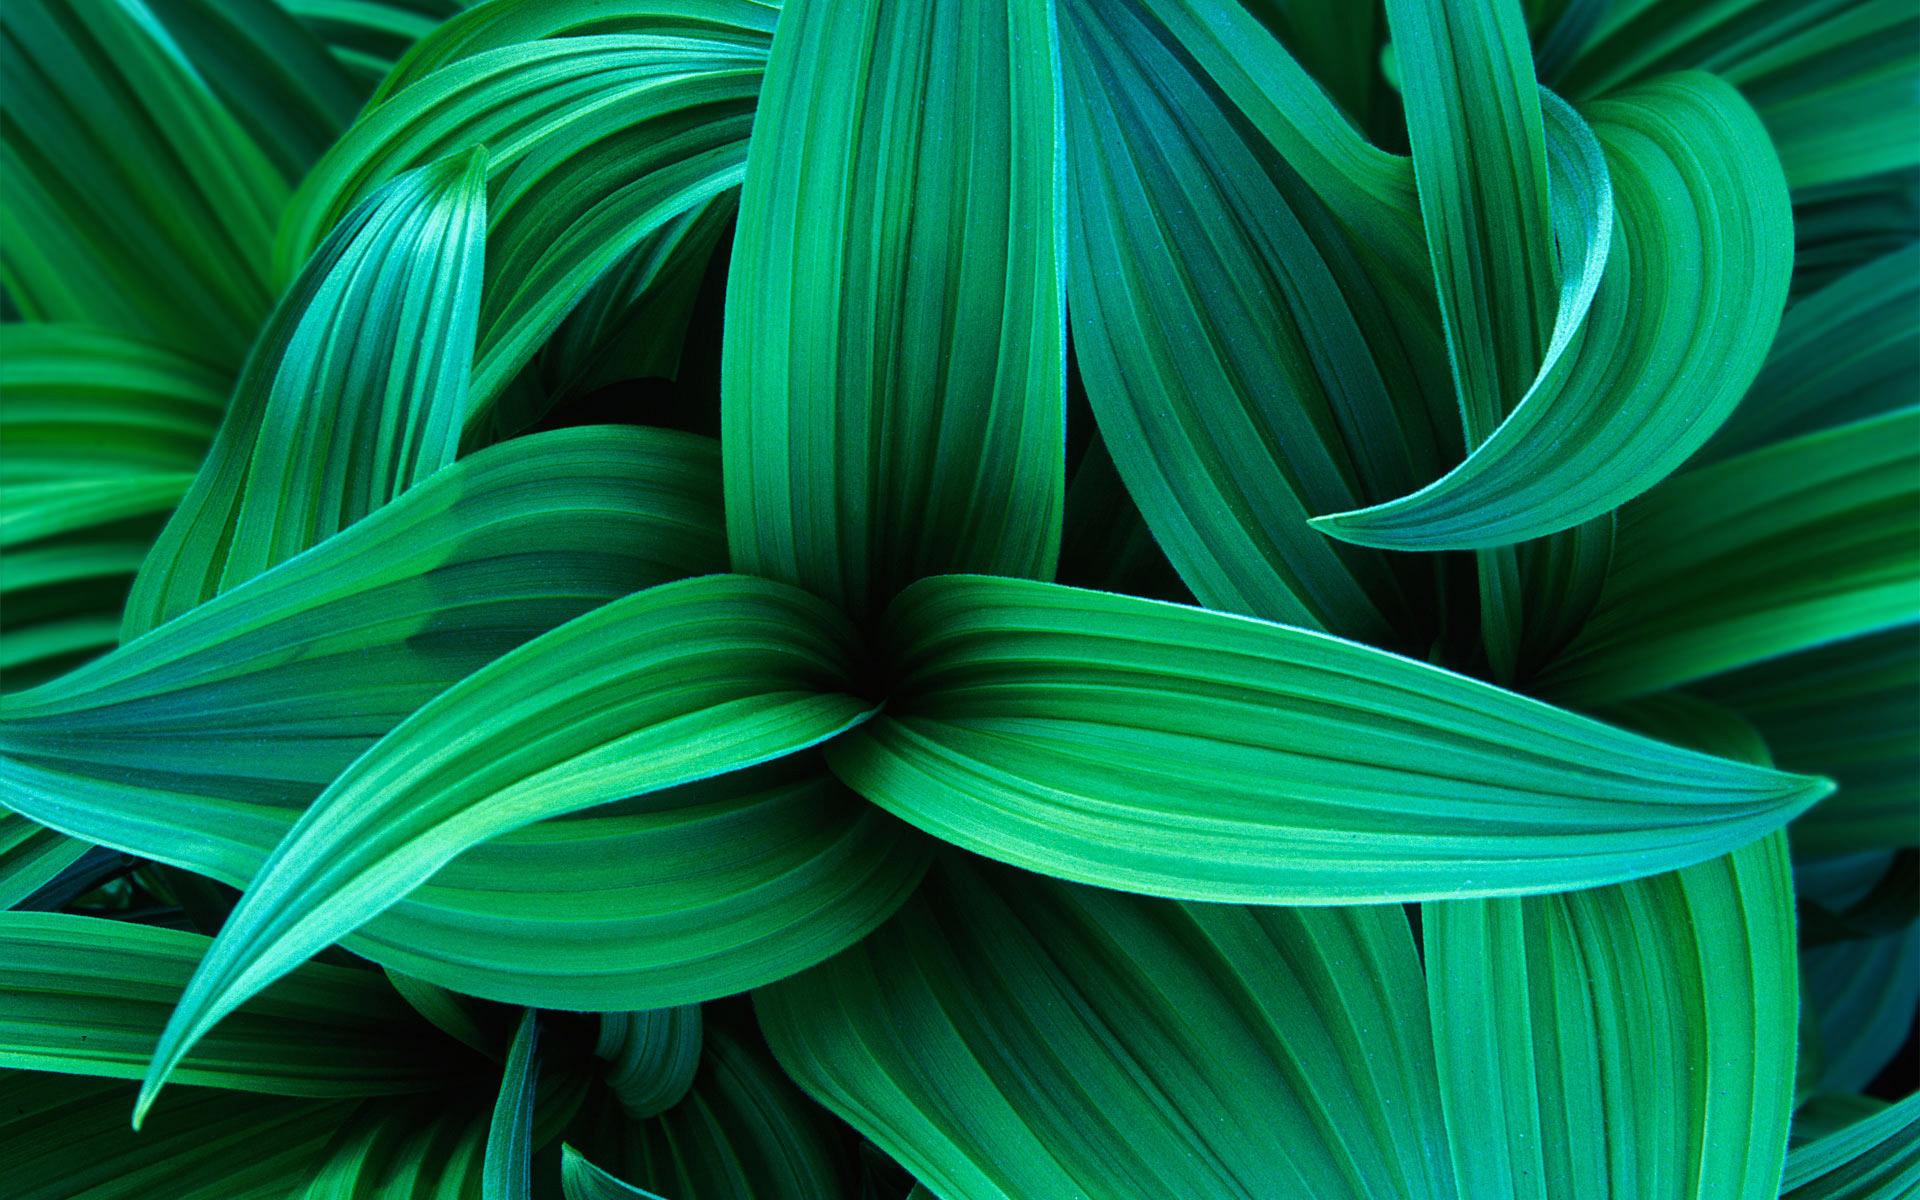 wallpaper themes,green,blue,leaf,turquoise,teal